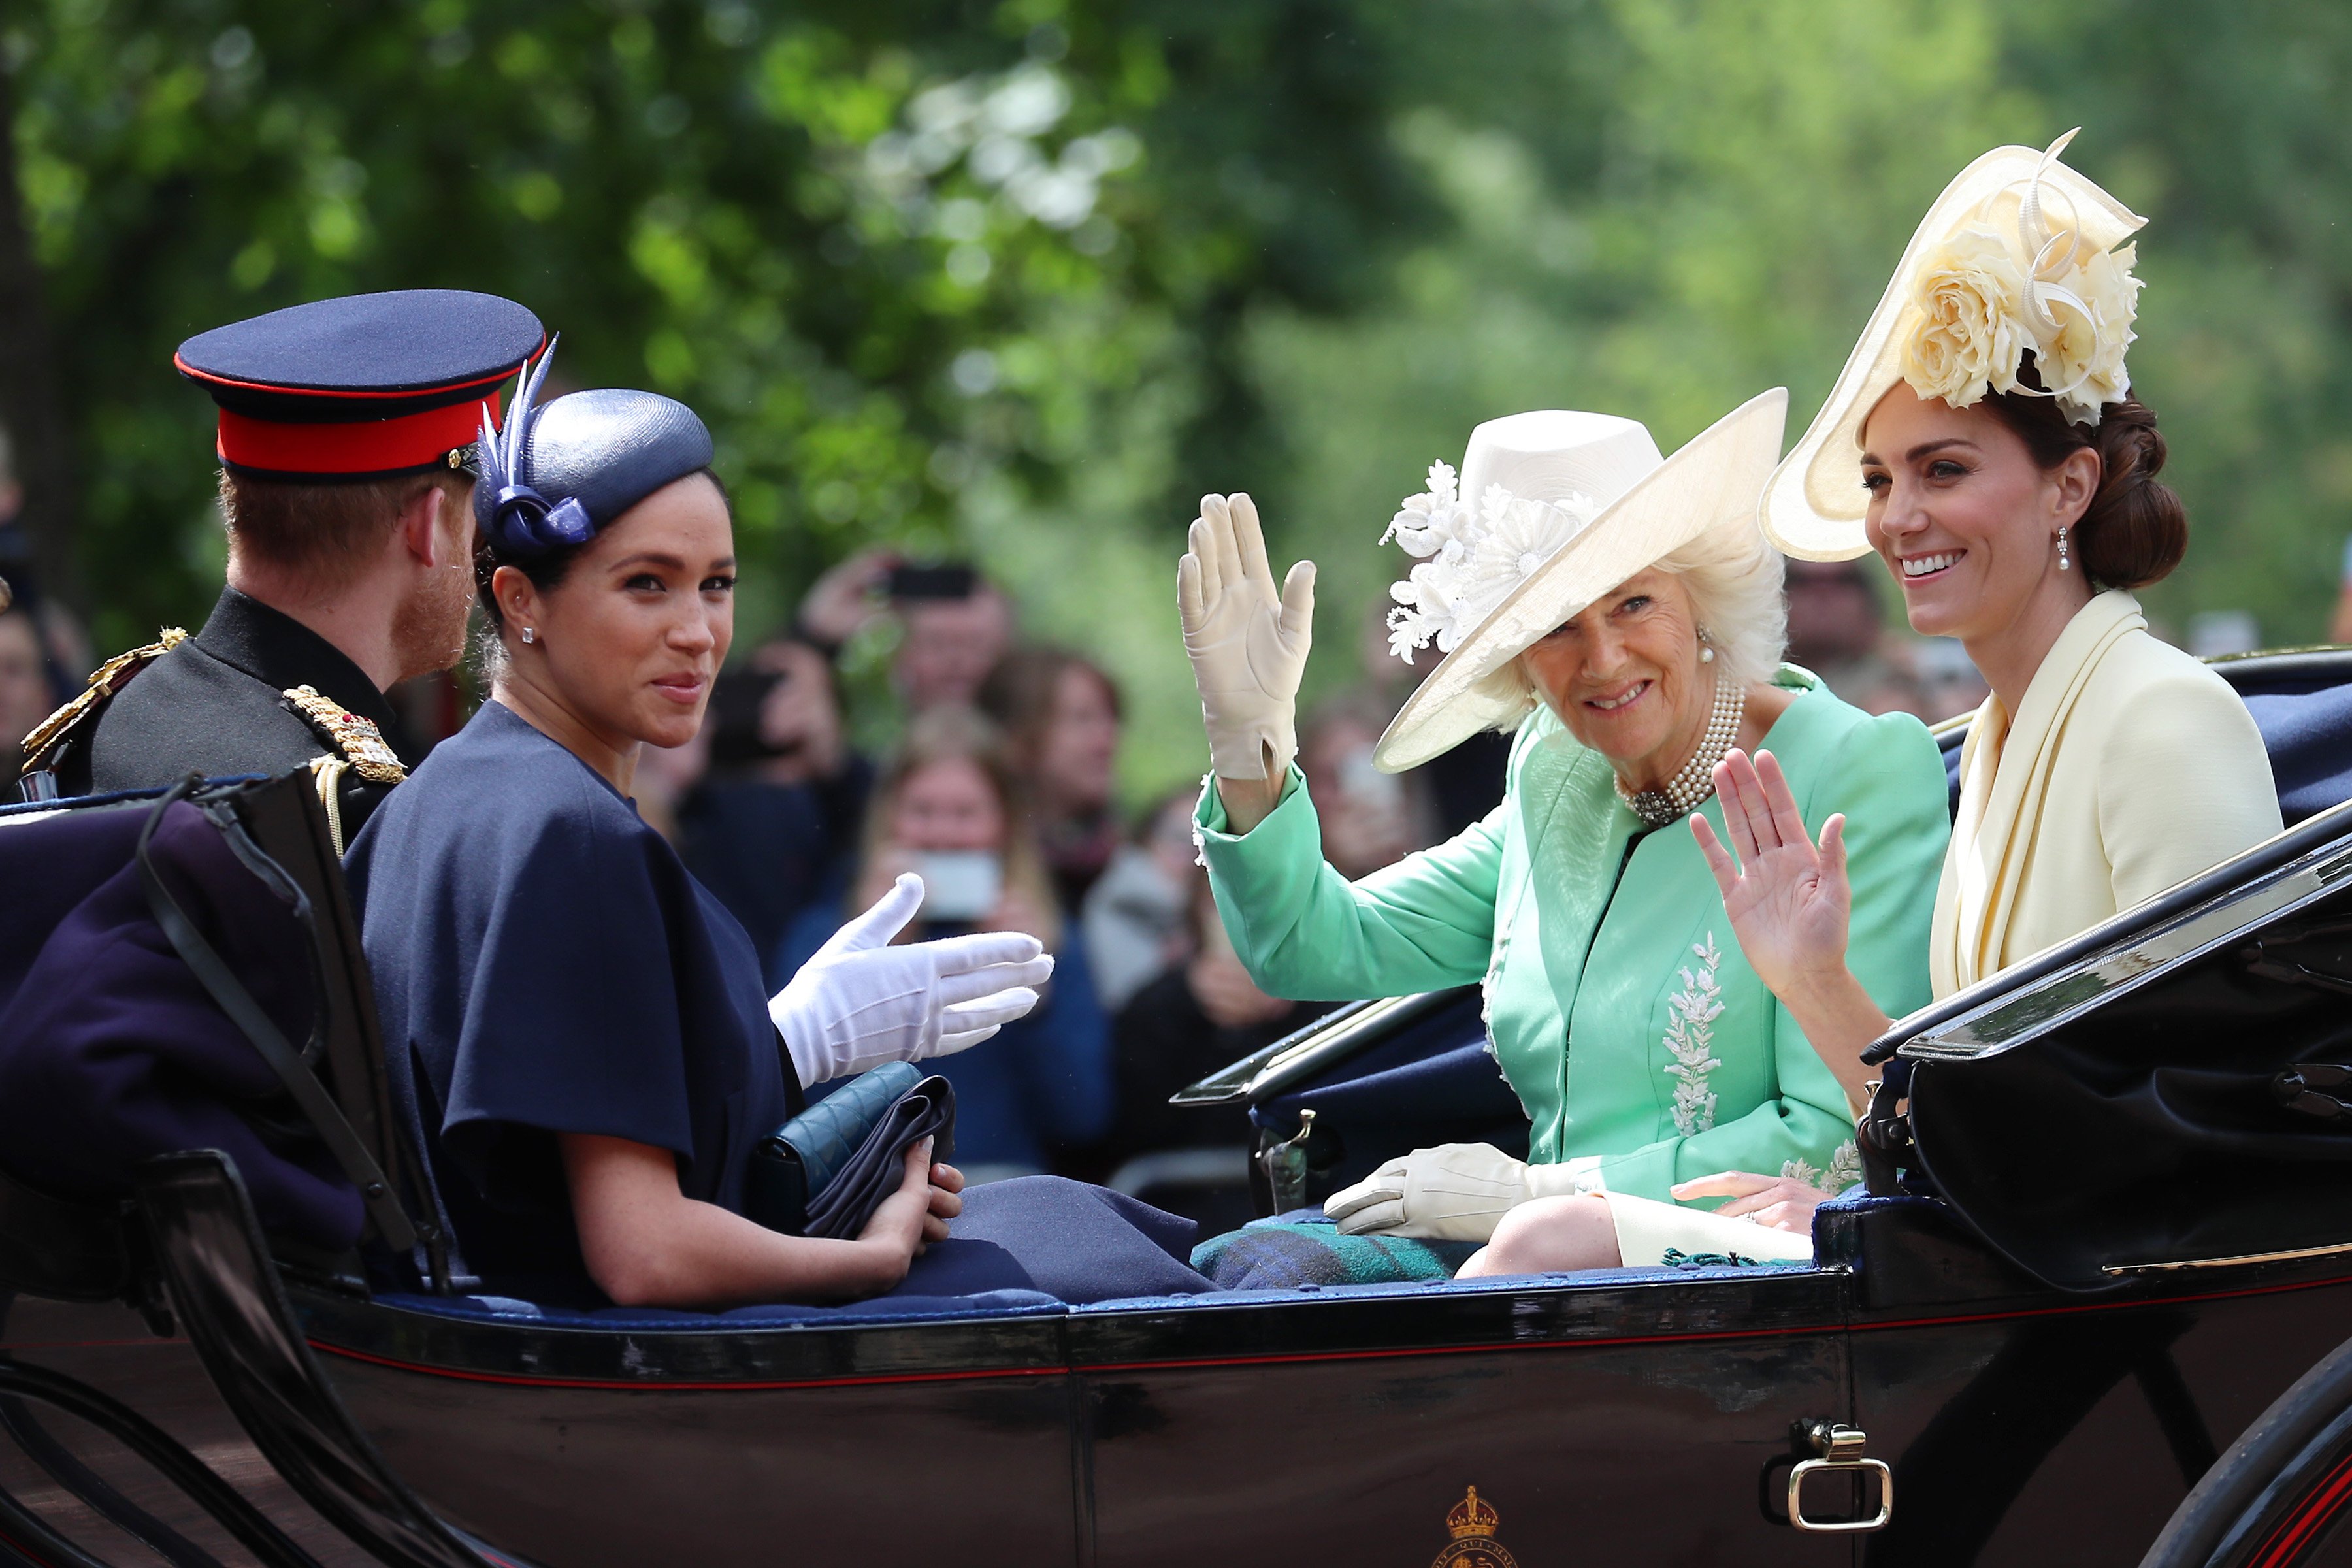 Prince Harry, Meghan Markle, Camilla, Duchess of Cornwall and Catherine, Duchess of Cambridge during Trooping The Colour, the Queen's annual birthday parade, on June 08, 2019 in London, England | Source: Getty Images